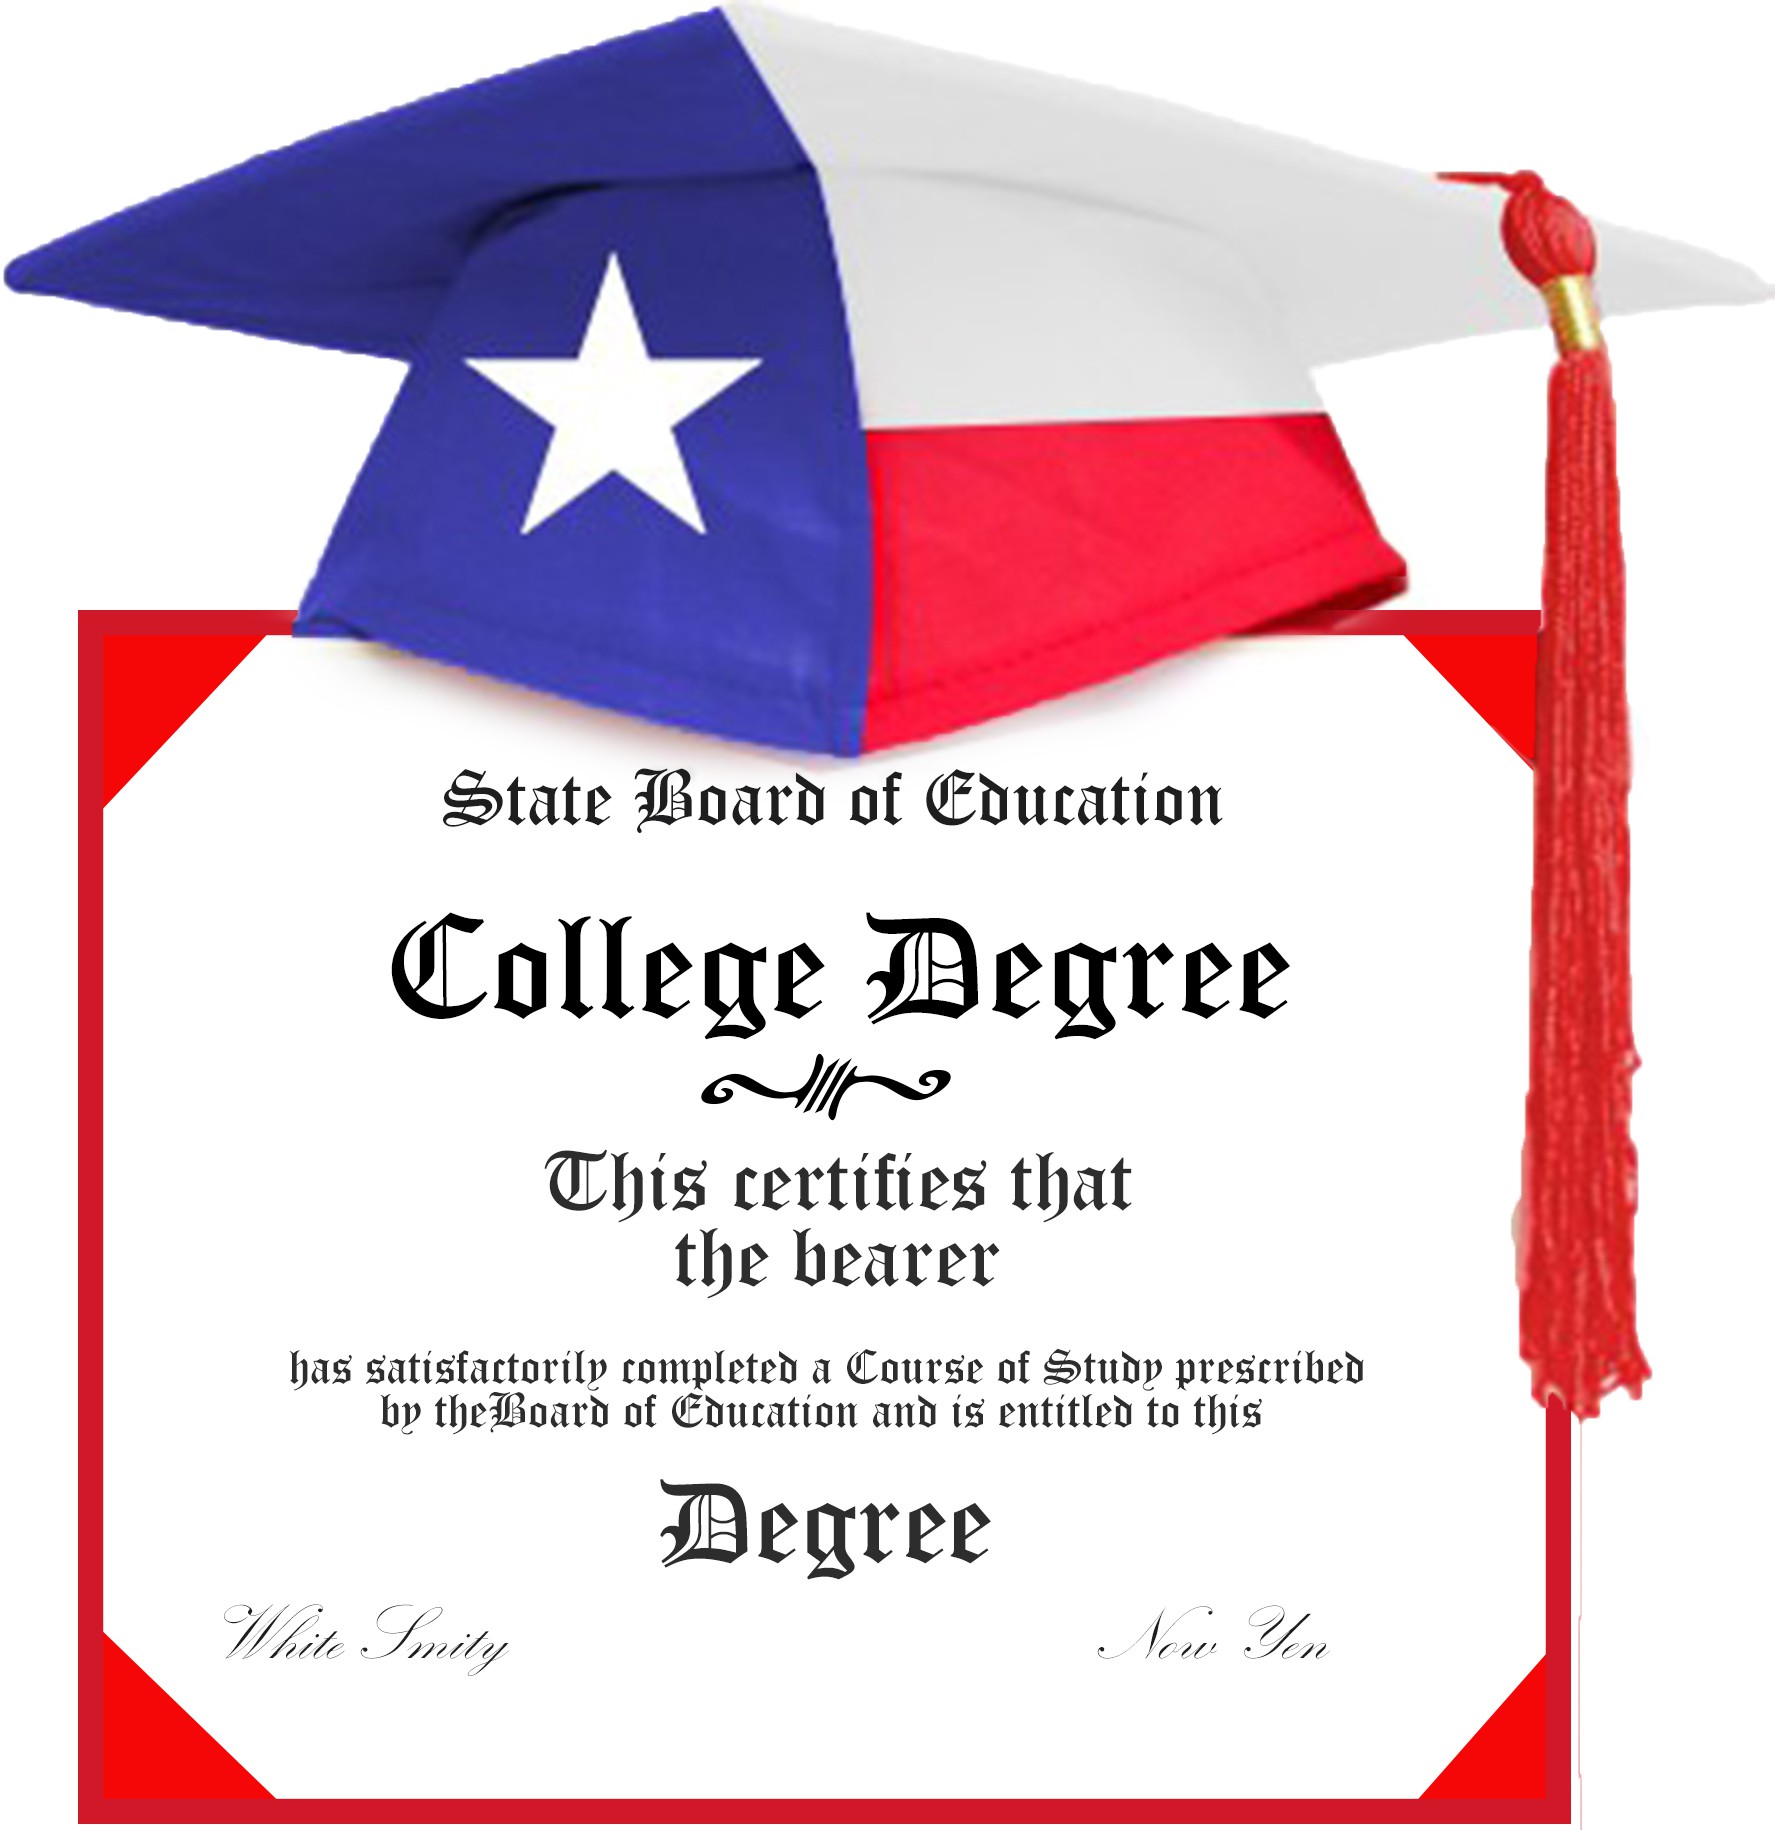 The University of Texas at Tyler College Degree